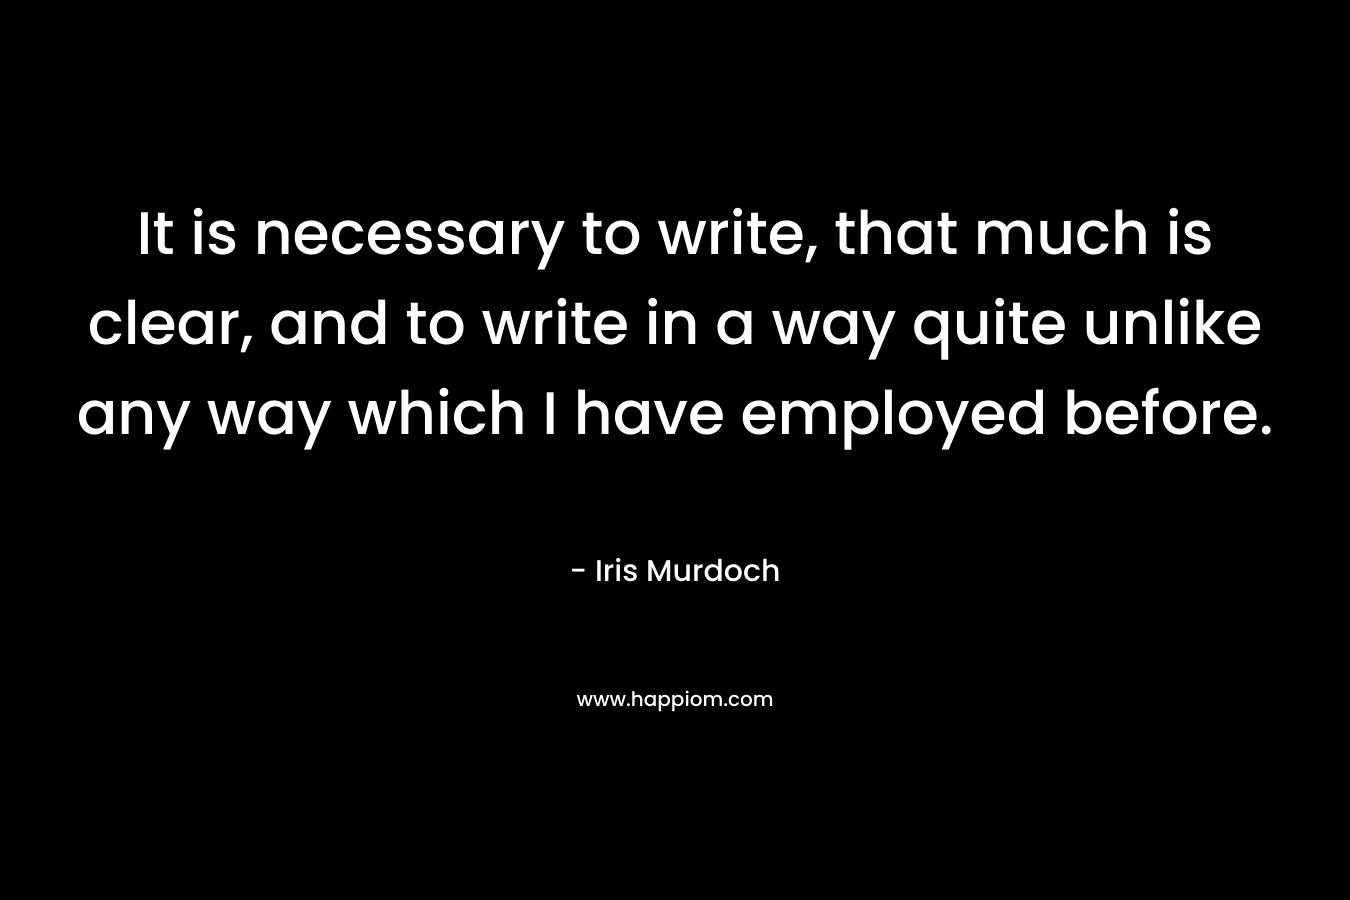 It is necessary to write, that much is clear, and to write in a way quite unlike any way which I have employed before.